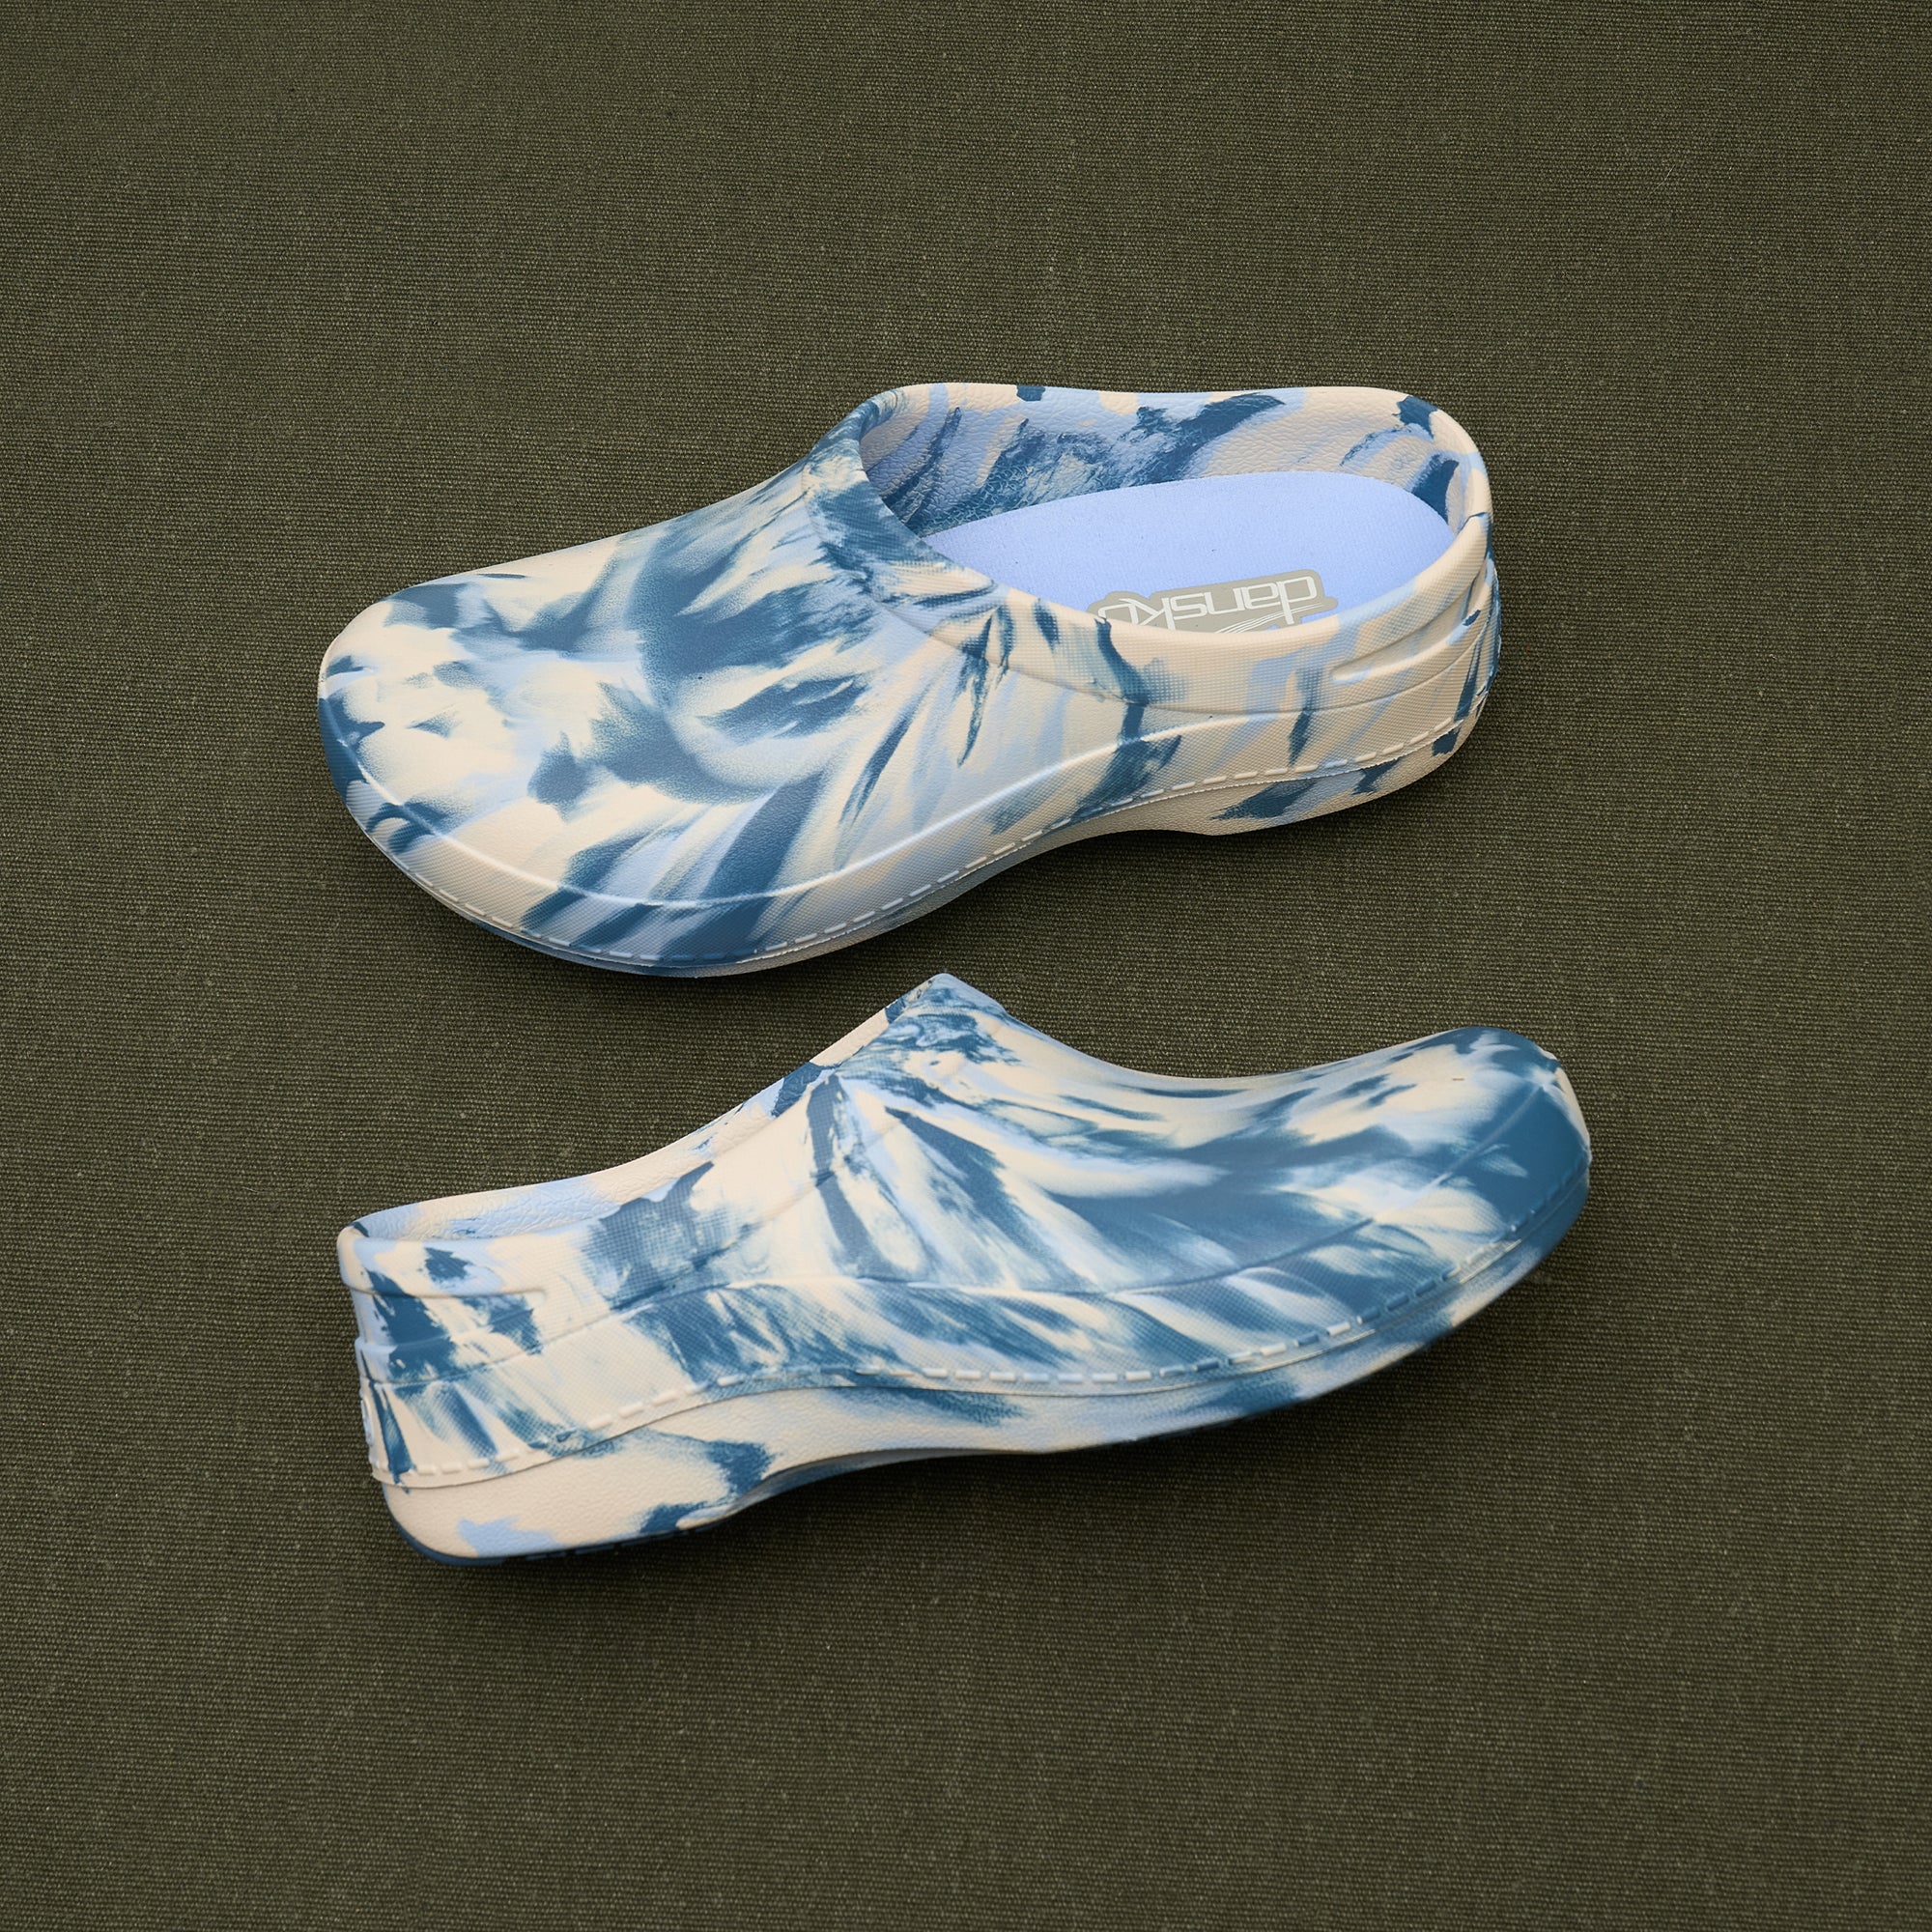 Blue and white tie-dye molded clogs with cushioned footbeds.